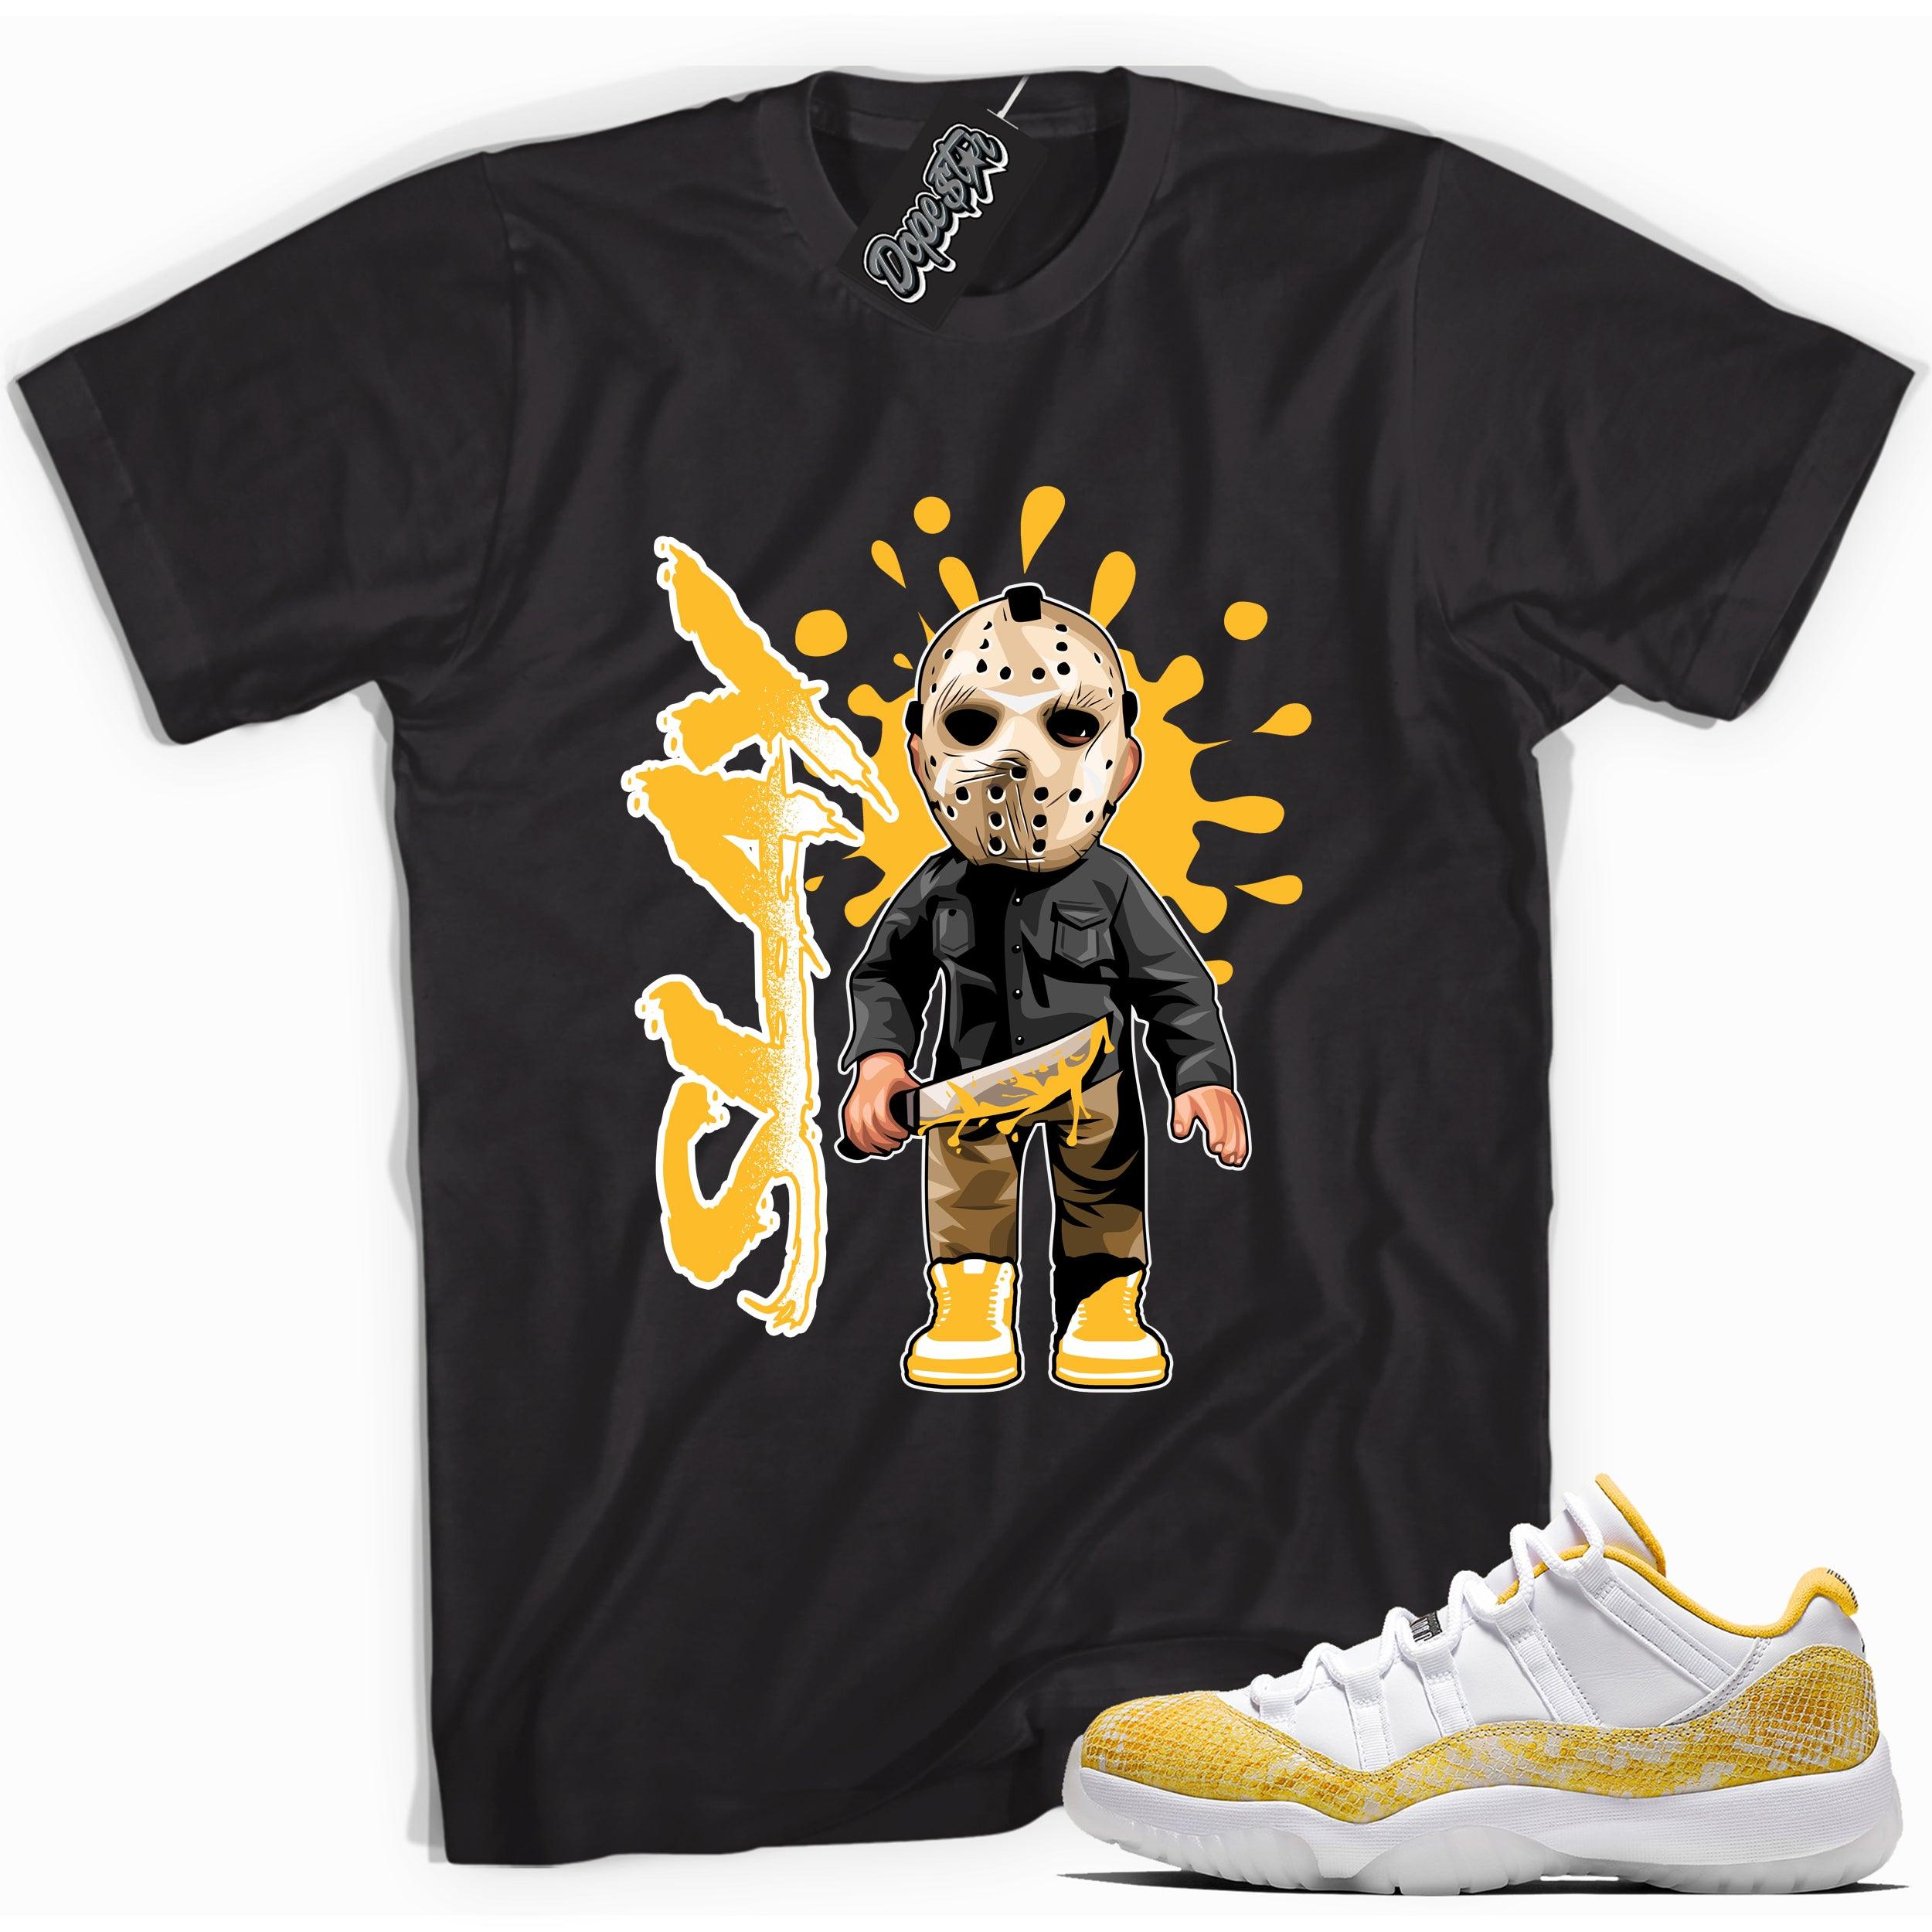 Cool black graphic tee with 'slay' print, that perfectly matches  Air Jordan 11 Retro Low Yellow Snakeskin sneakers